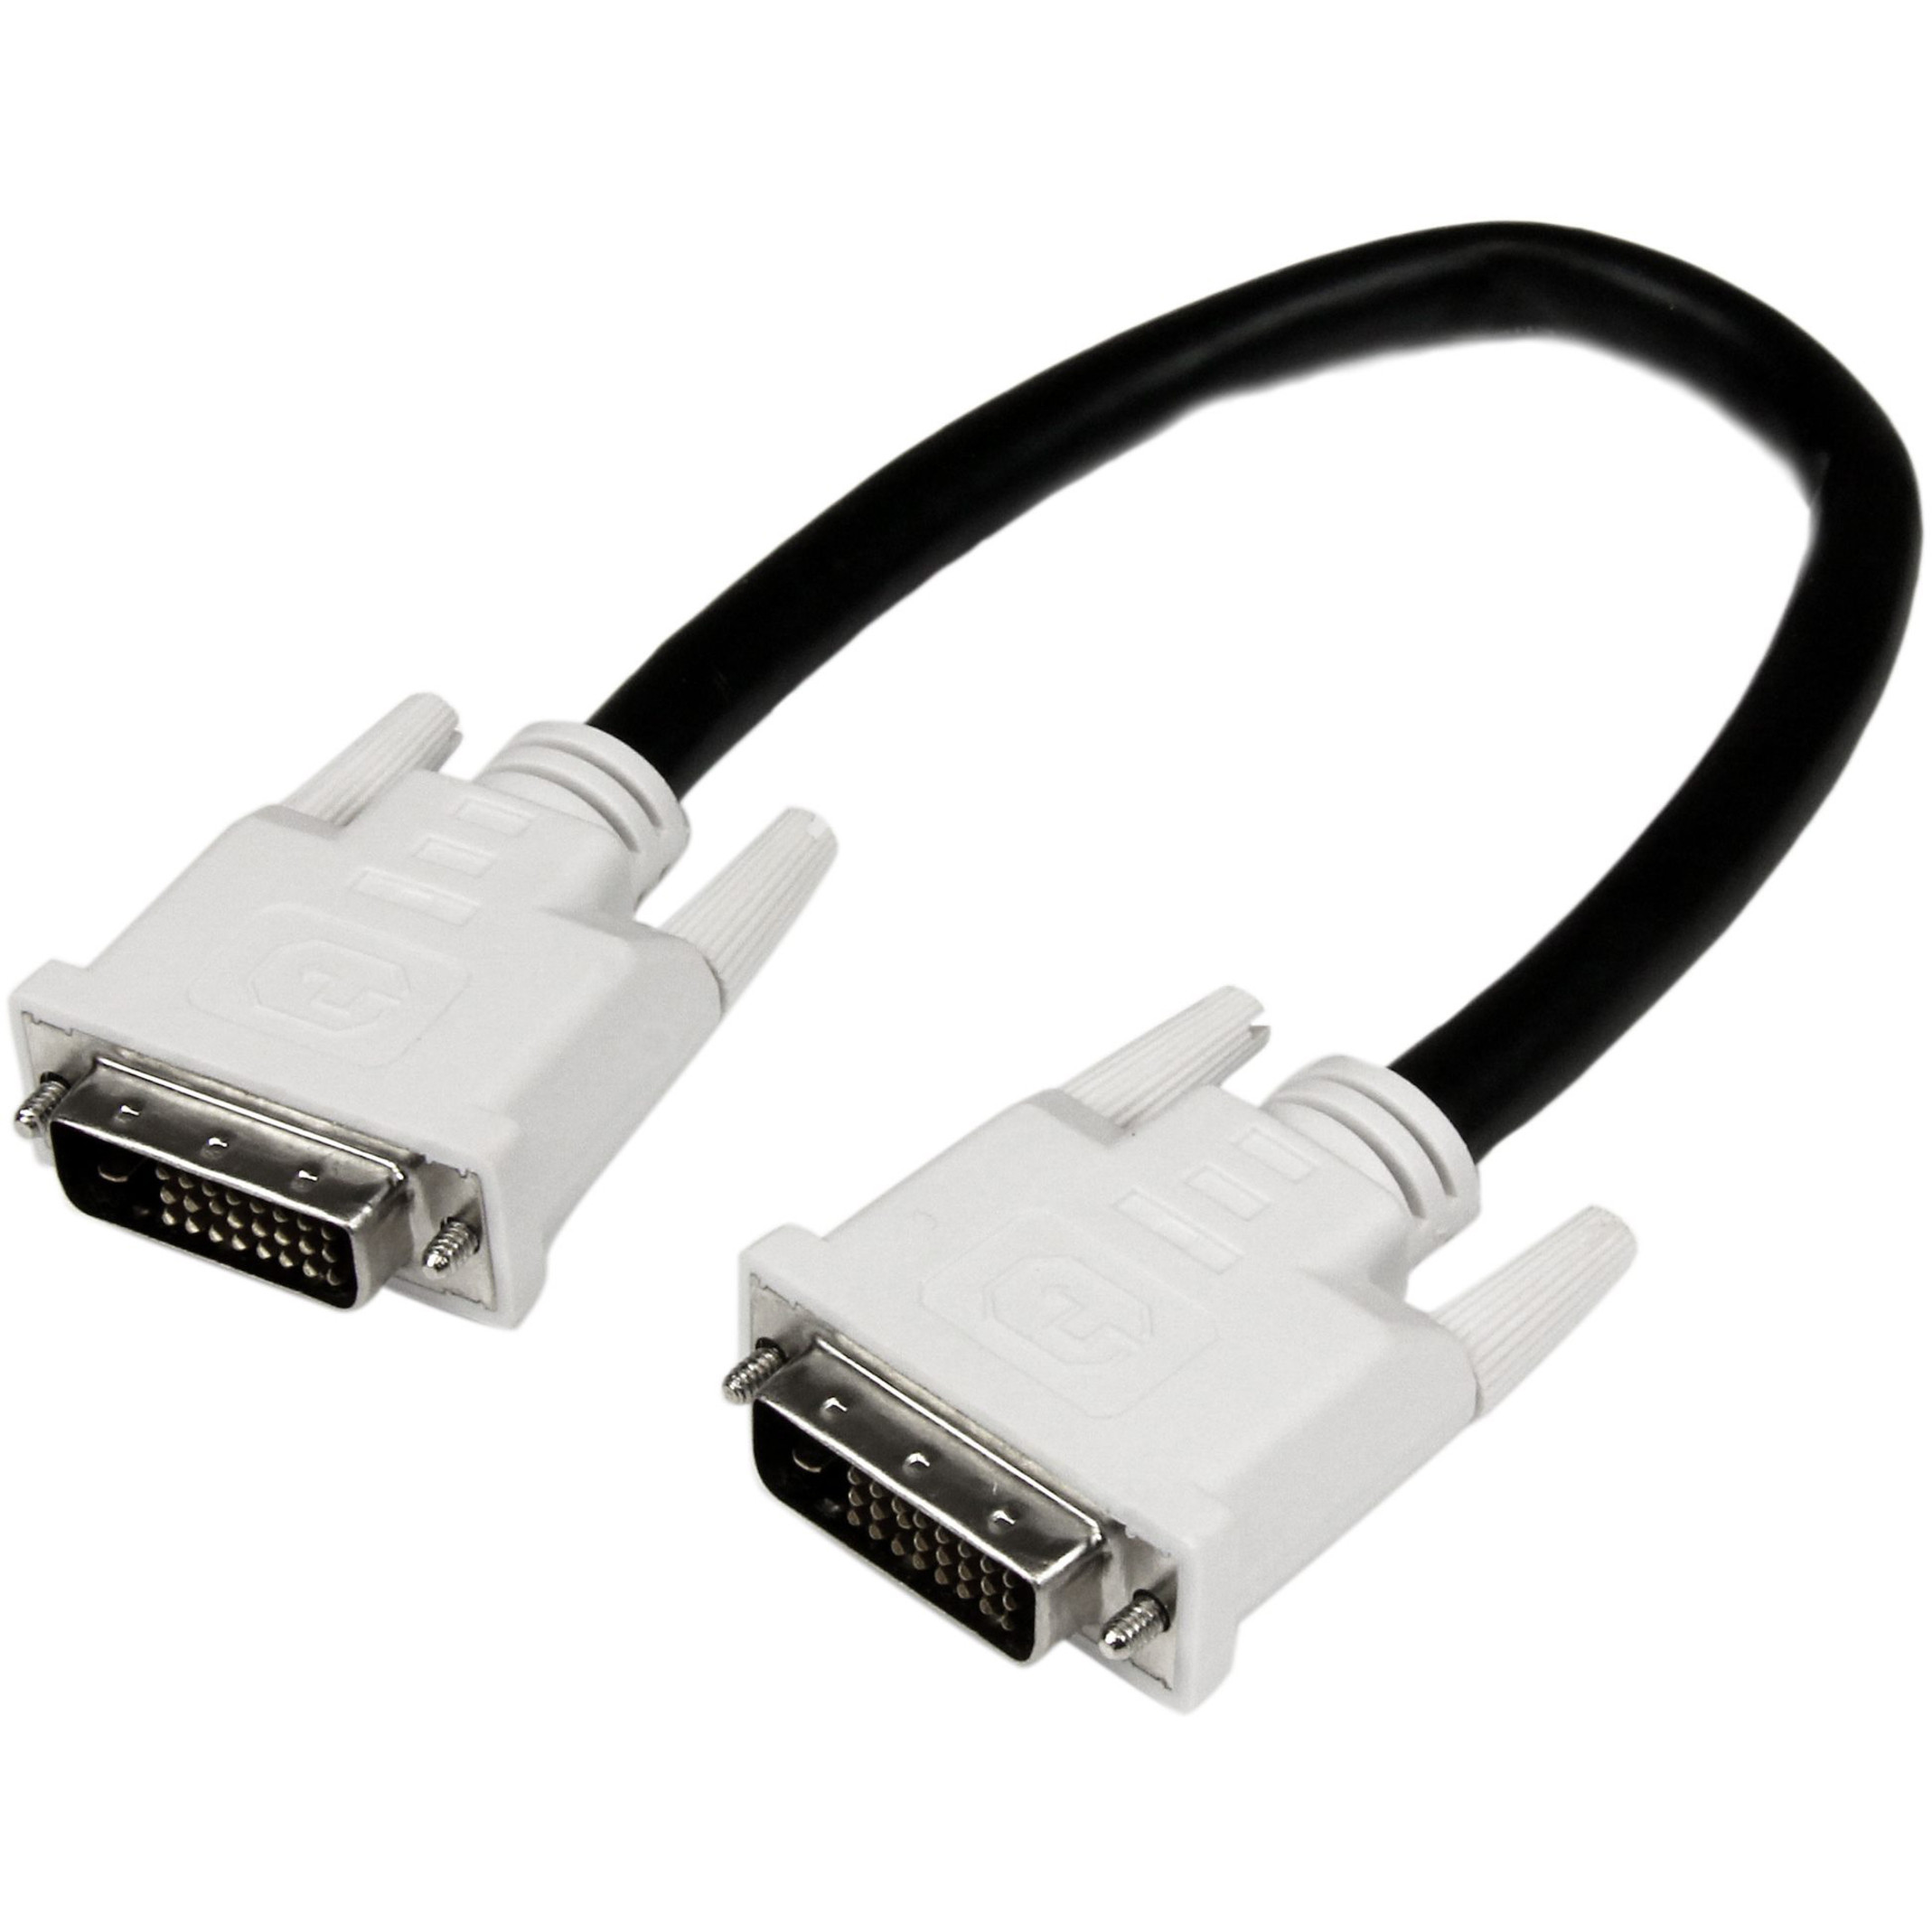 Startech .com 1 ft DVI-D Dual Link CableM/MProvides a high-speed, crystal-clear connection to your DVI digital devices1ft DVI-D Dual Li… DVIDDMM1